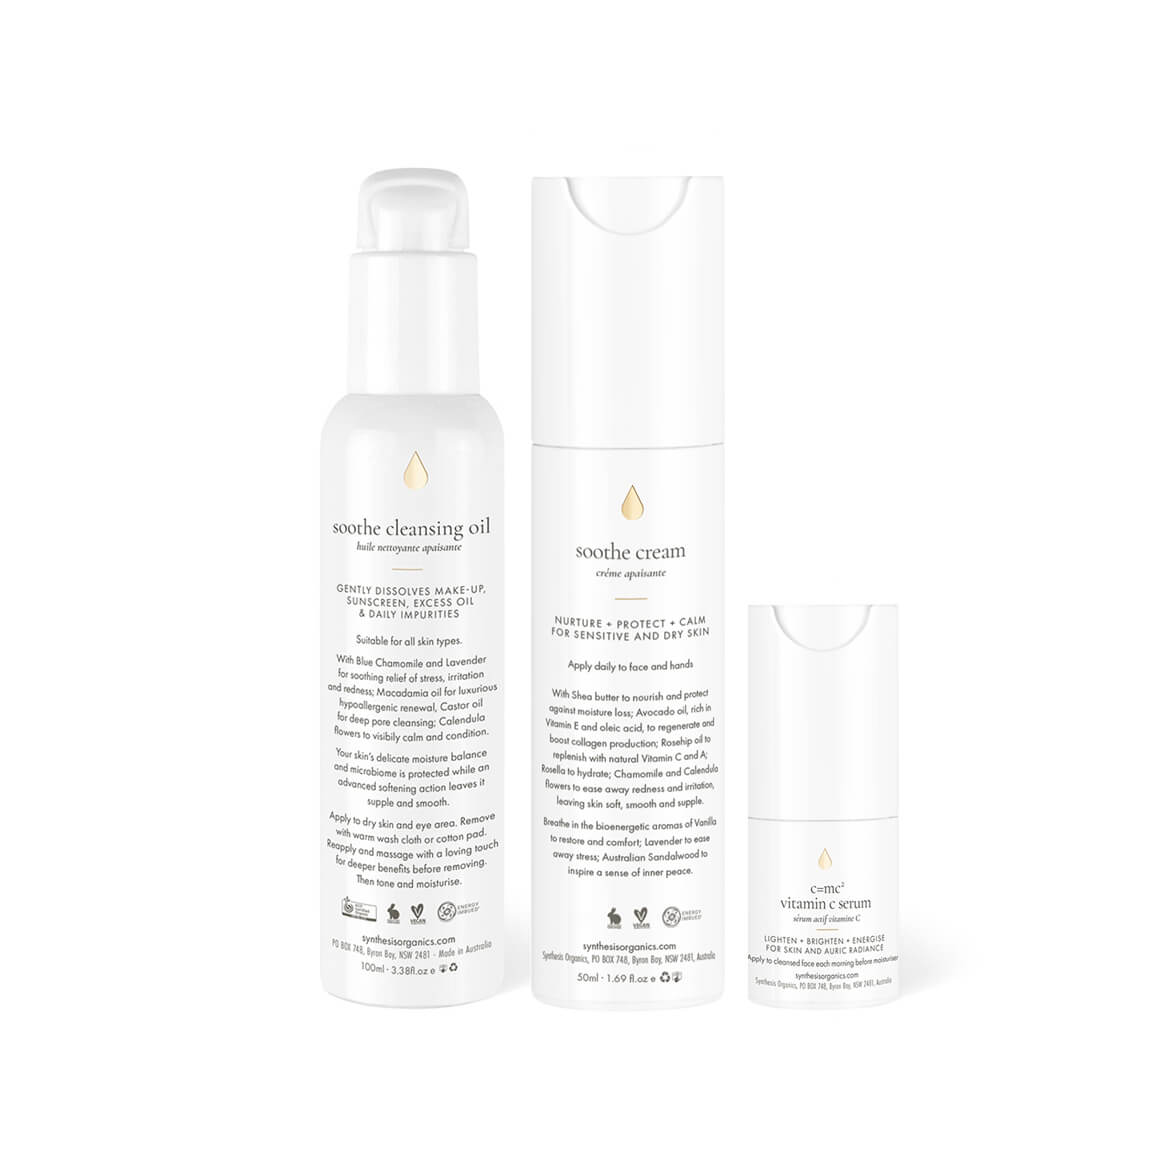 Collection 1: Essentials Other Synthesis Organics With C=mc¬≤ Vit C or HA+ Flower Dew Serum